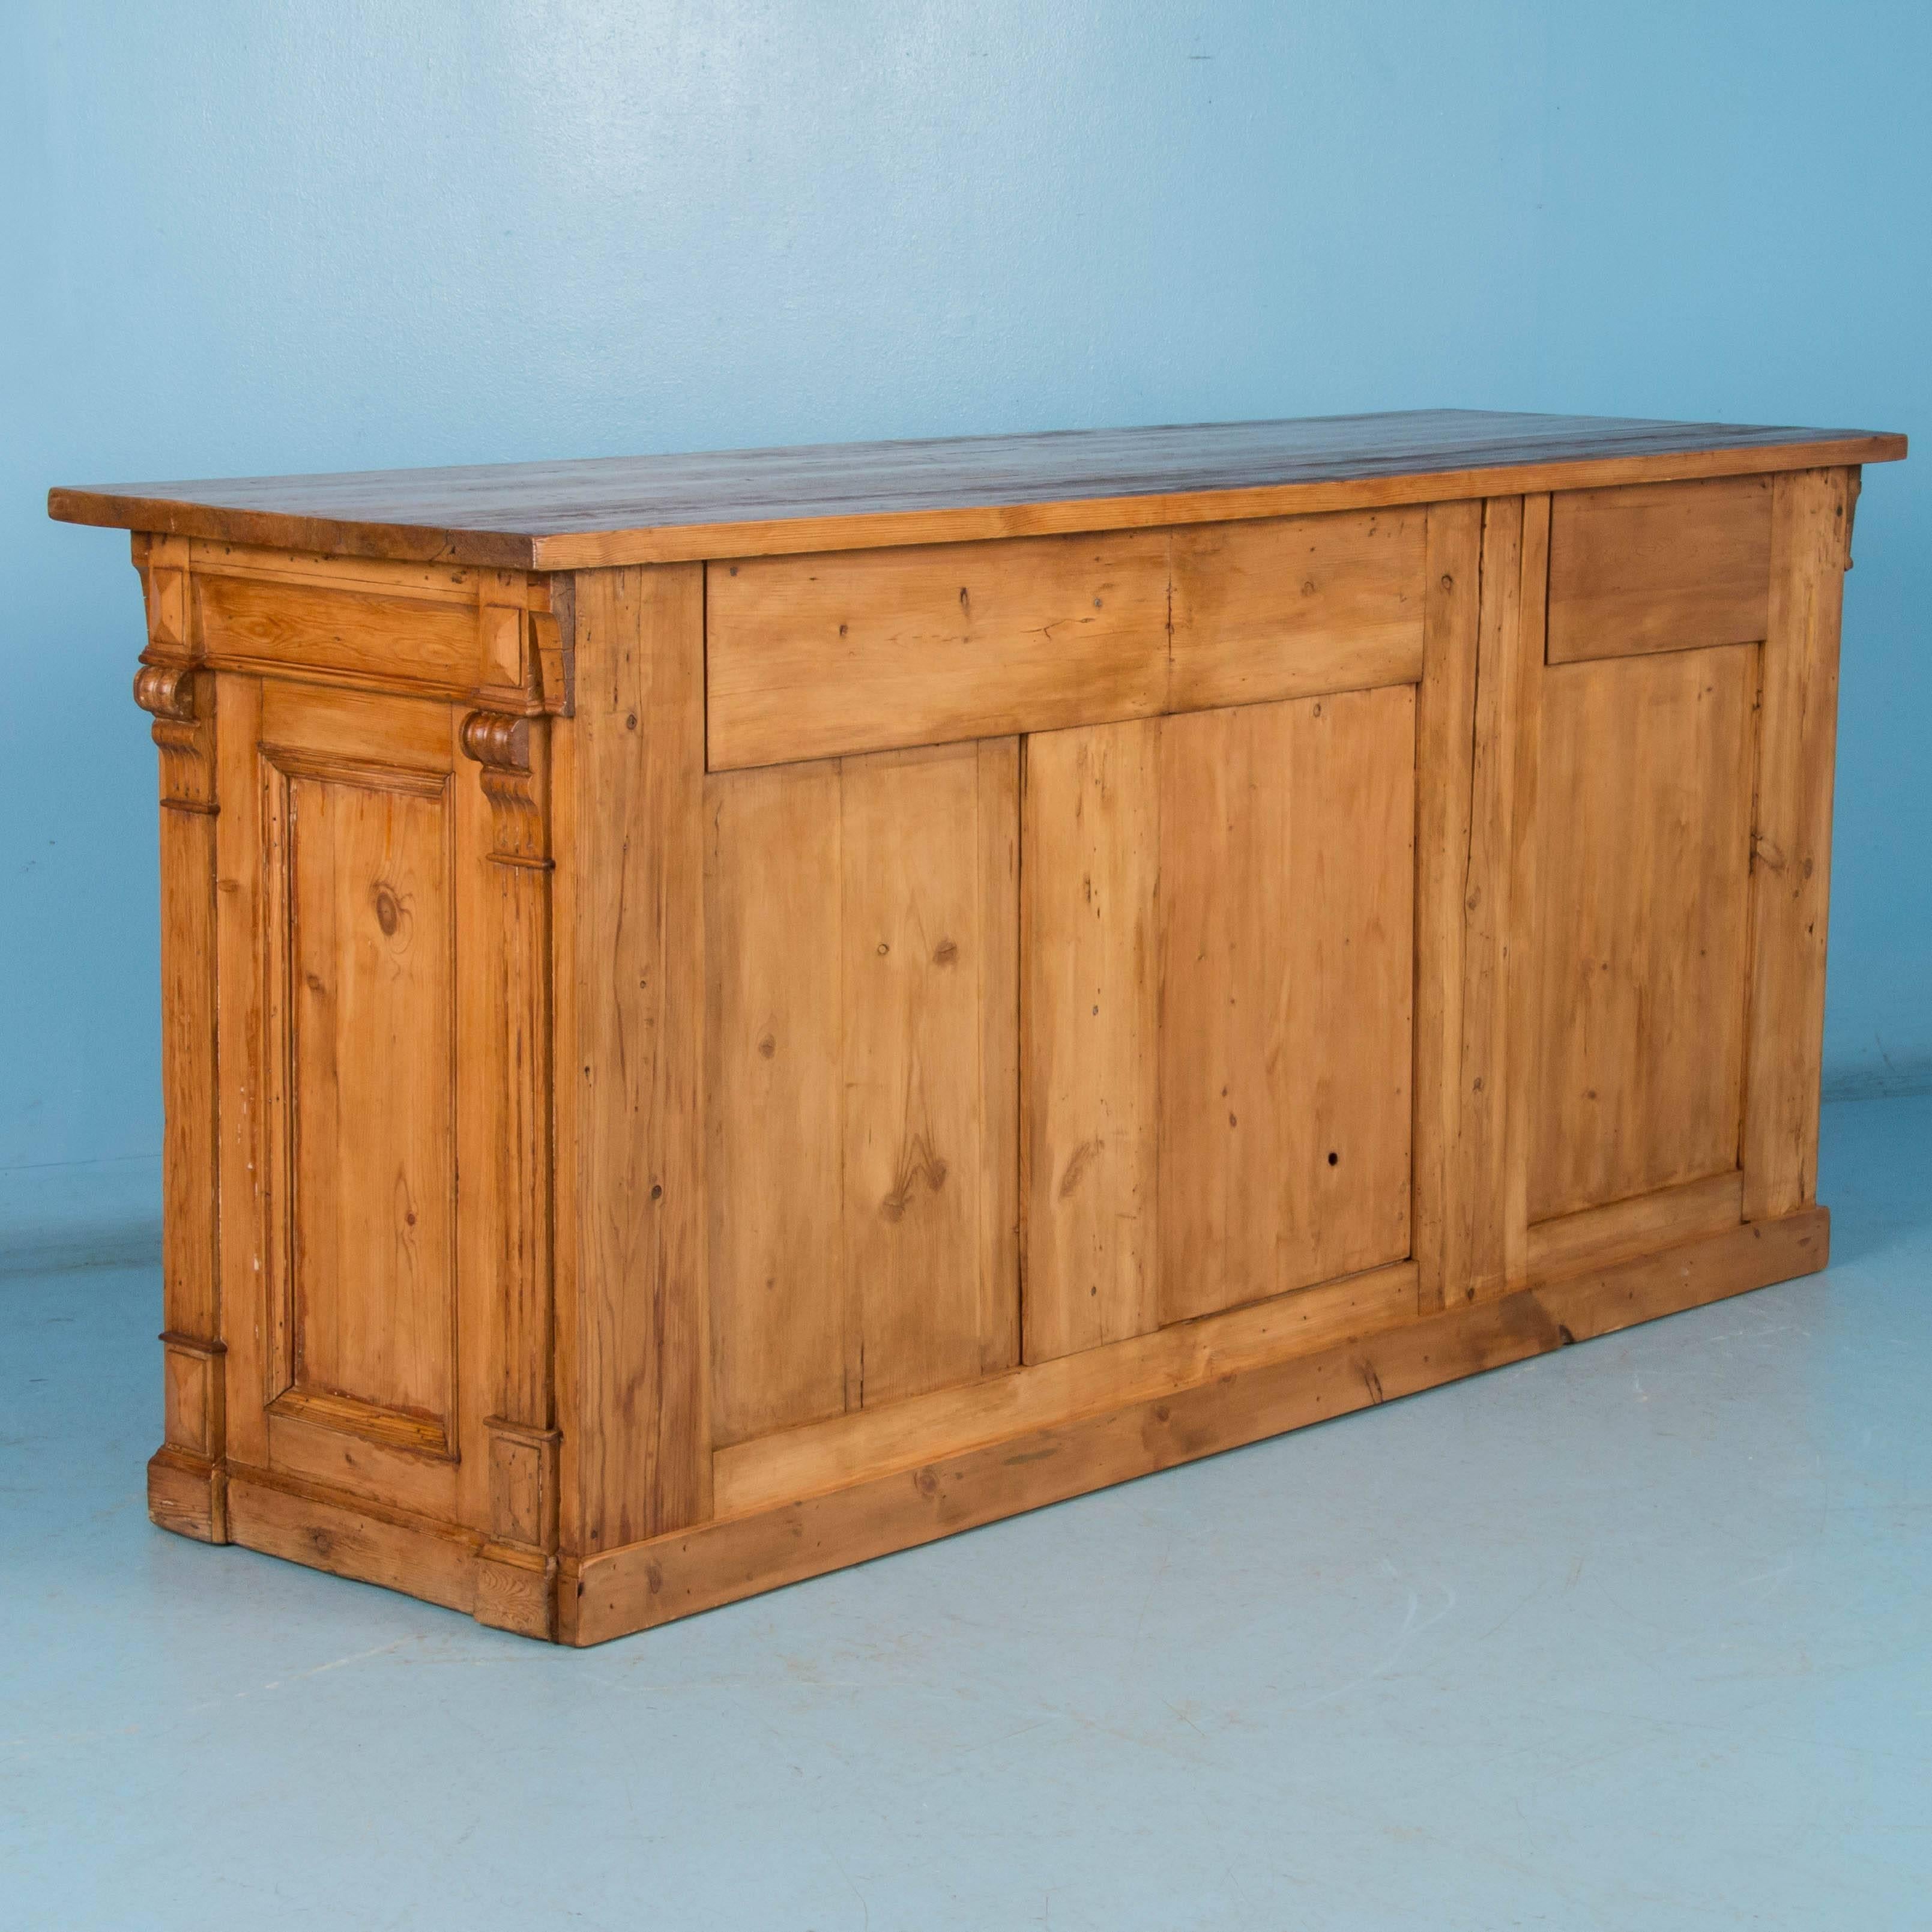 A rare find, this 19th century grocer's store counter is as versatile as it is unusual. The cabinet is made of pine with a rich, time worn patina. On either side of the unique 35 bottle wine rack is a series of large and small drawers. This is a